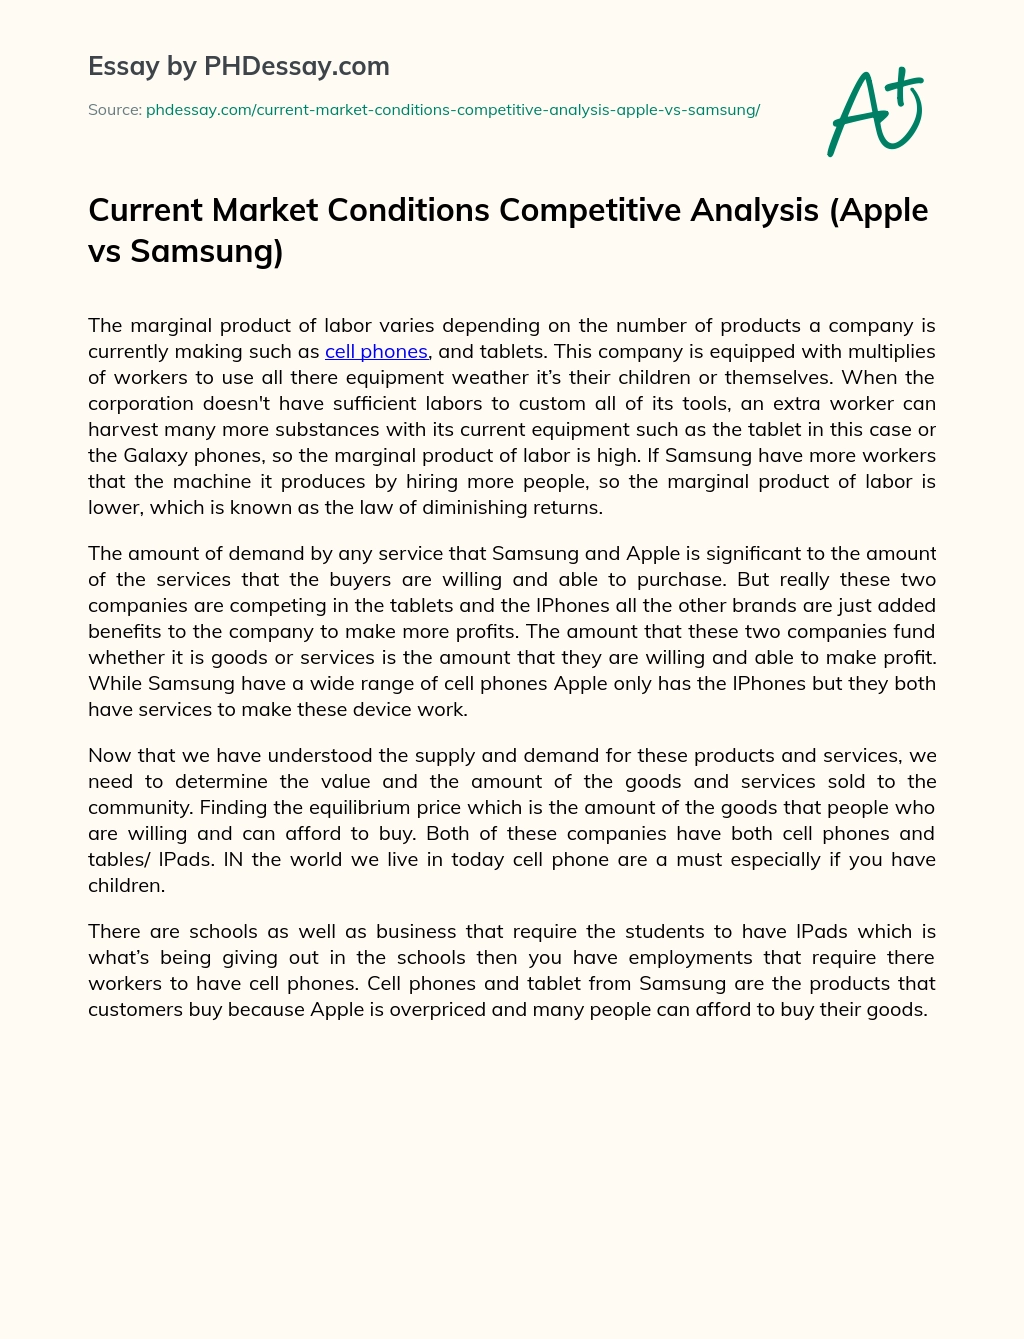 Current Market Conditions Competitive Analysis (Apple vs Samsung) essay